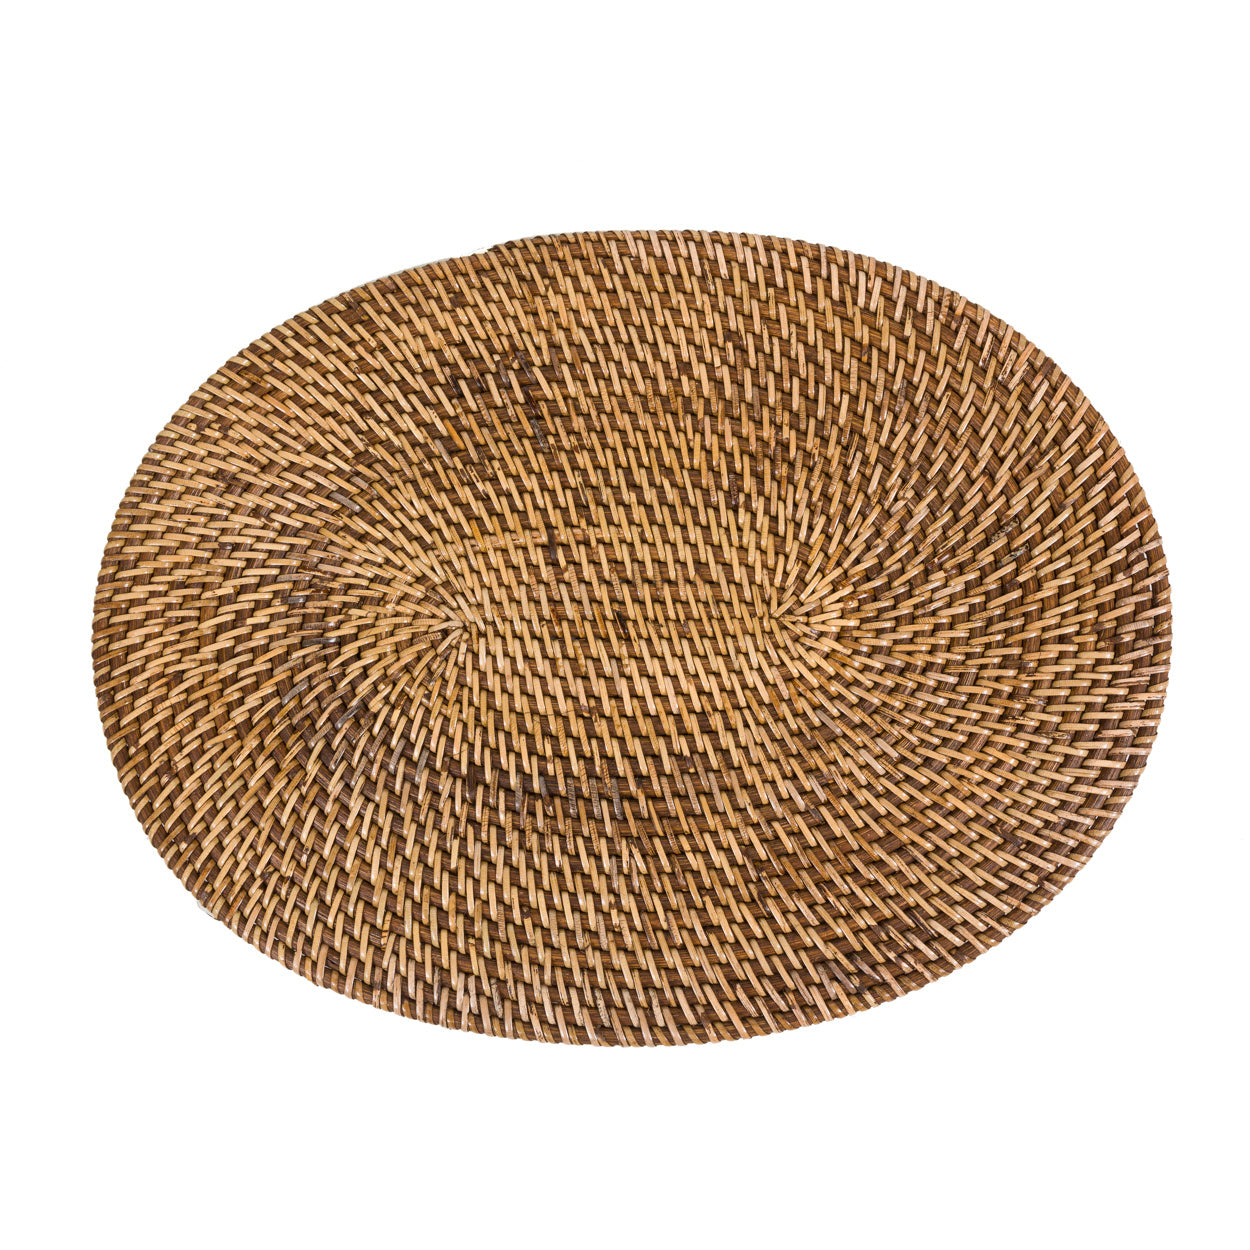 THE COLONIAL Oval Placemat Natural-Brown front view